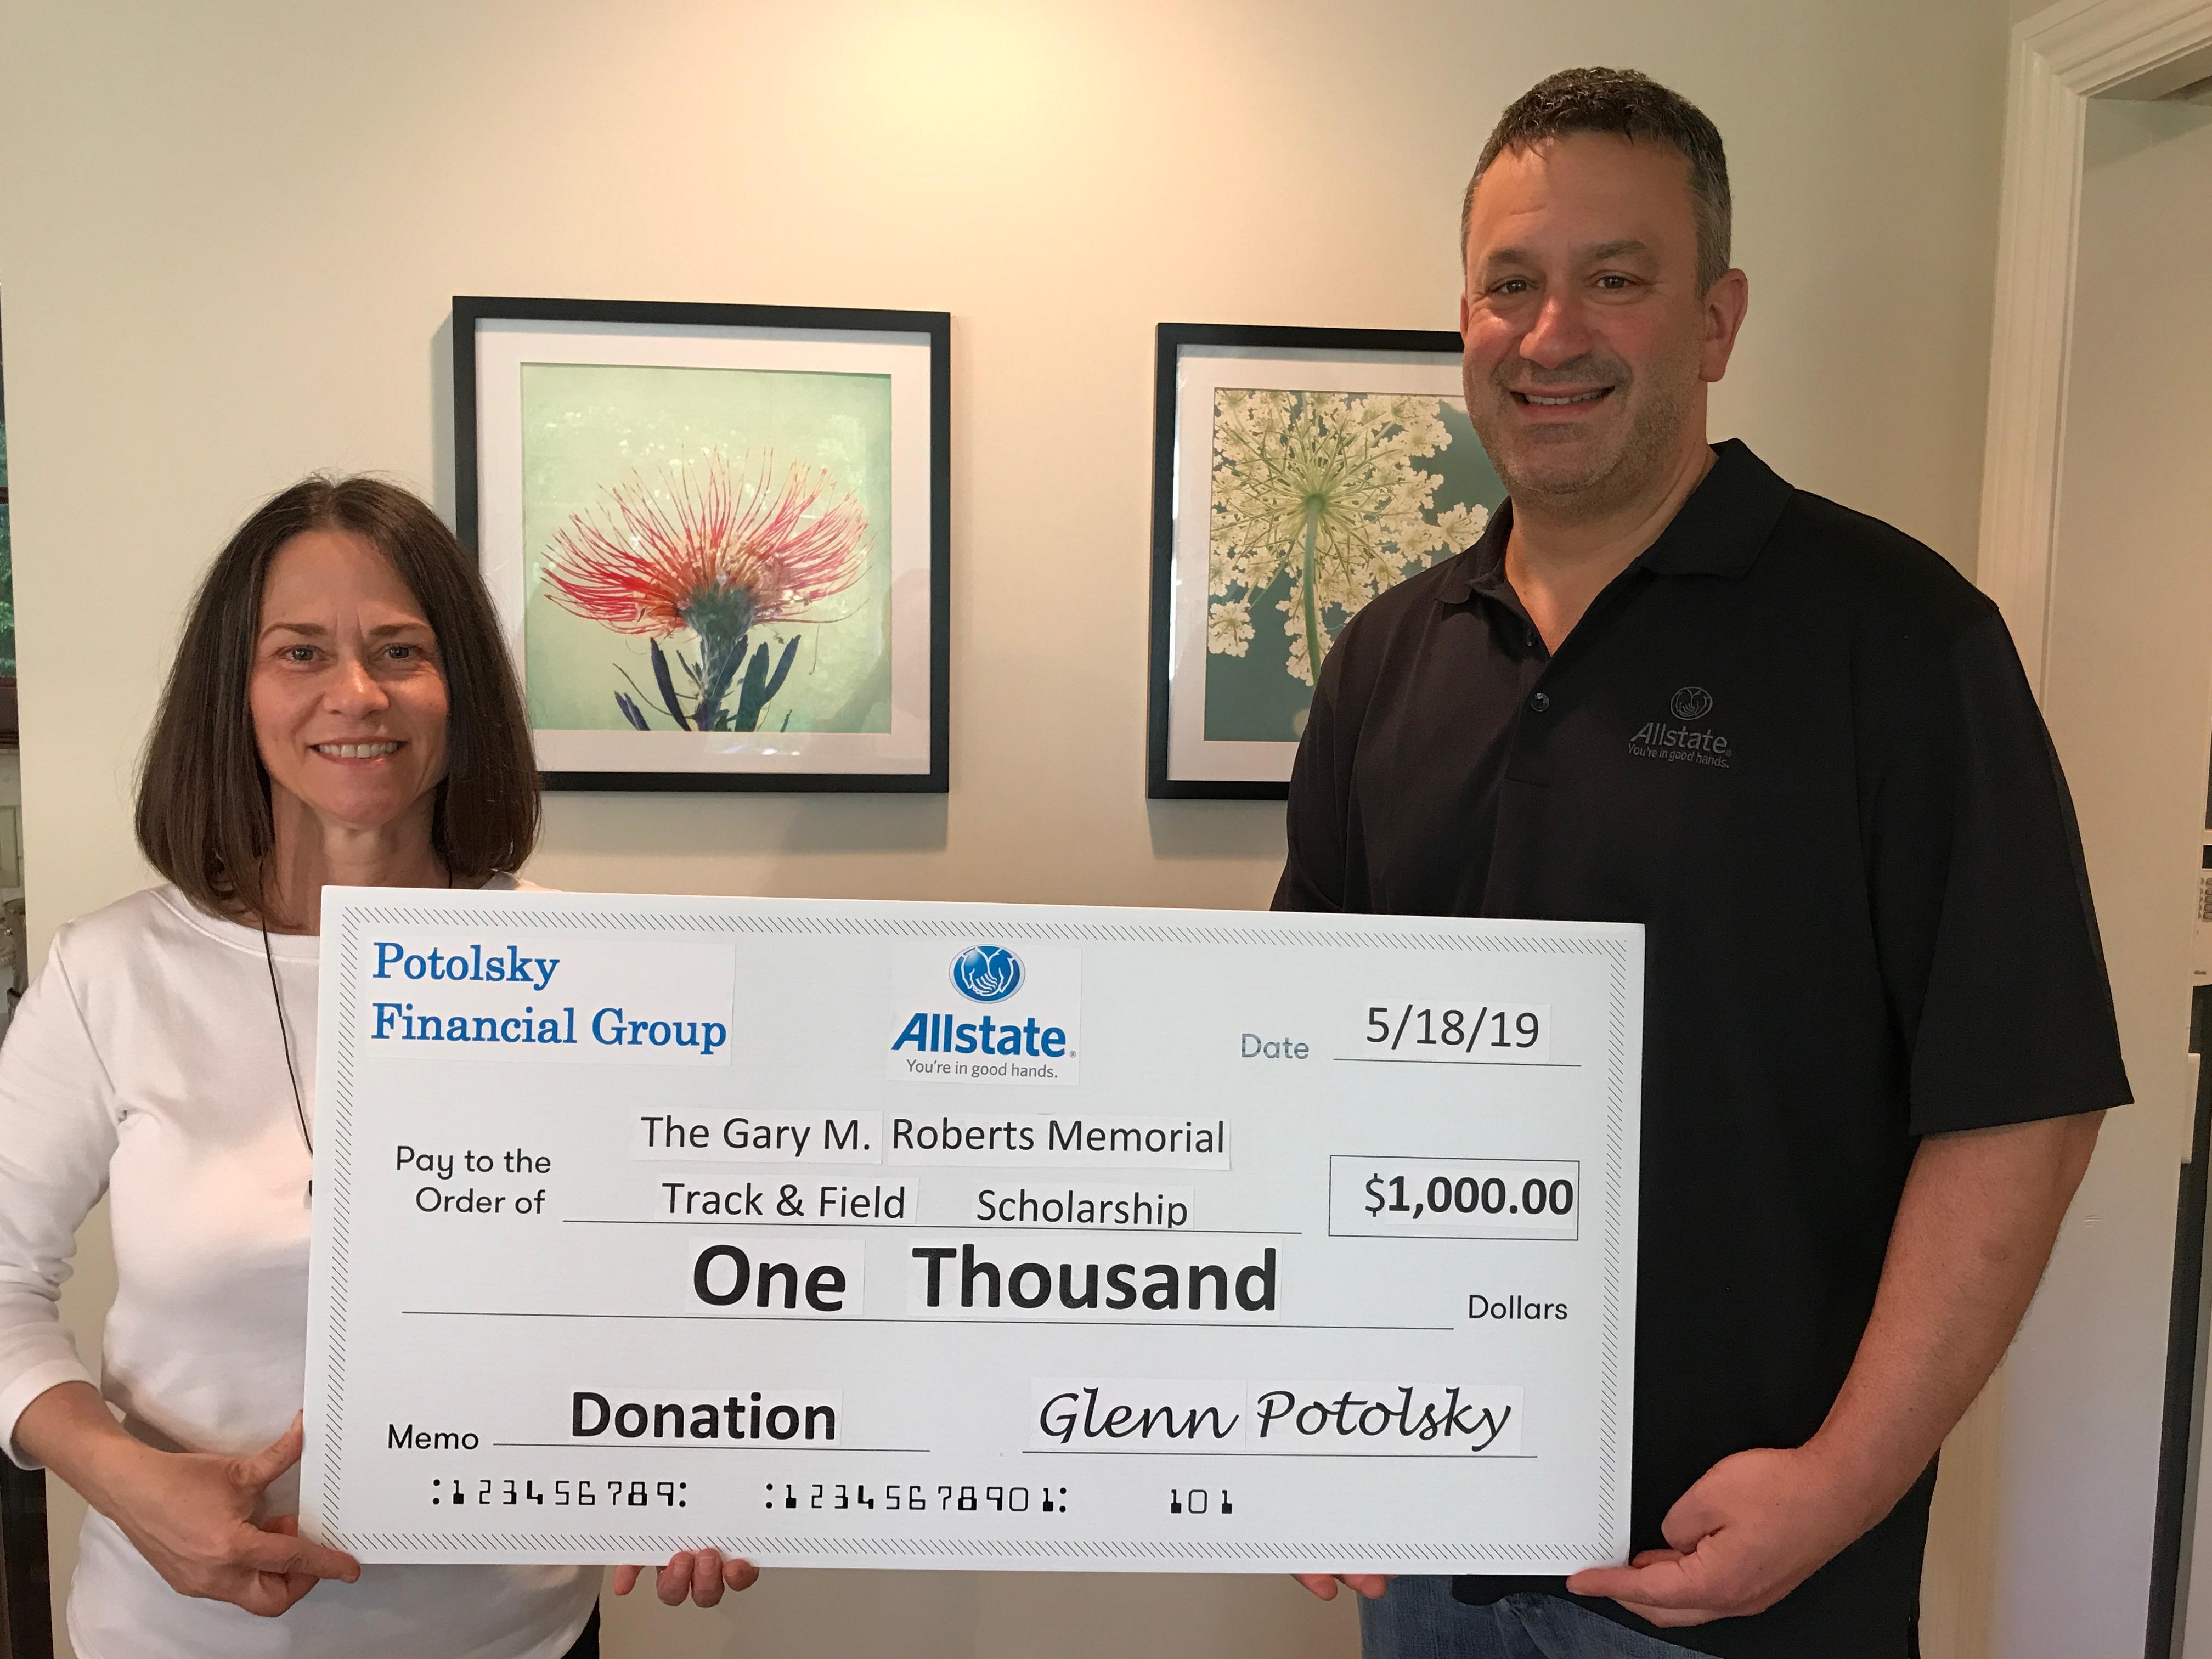 In May 2019, our Allstate agency was proud to show our support for The Gary M. Roberts Memorial Track & Field Scholarship with this donation.